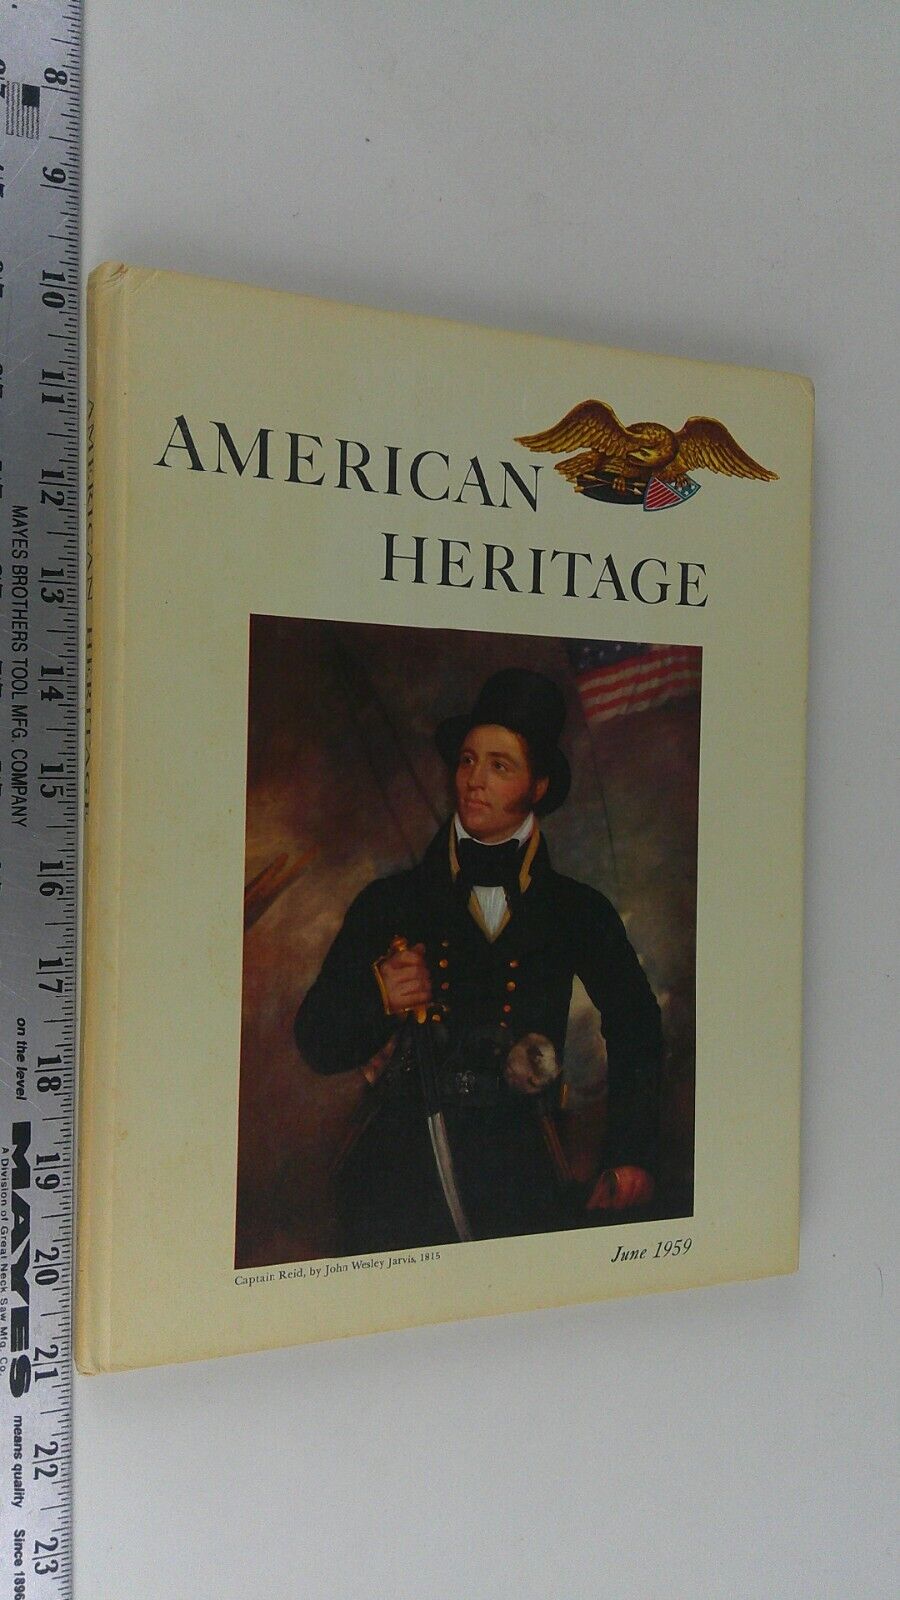 American Heritage Vol. 10 No. 4 June 1959 Of Raleigh and the First Plantation